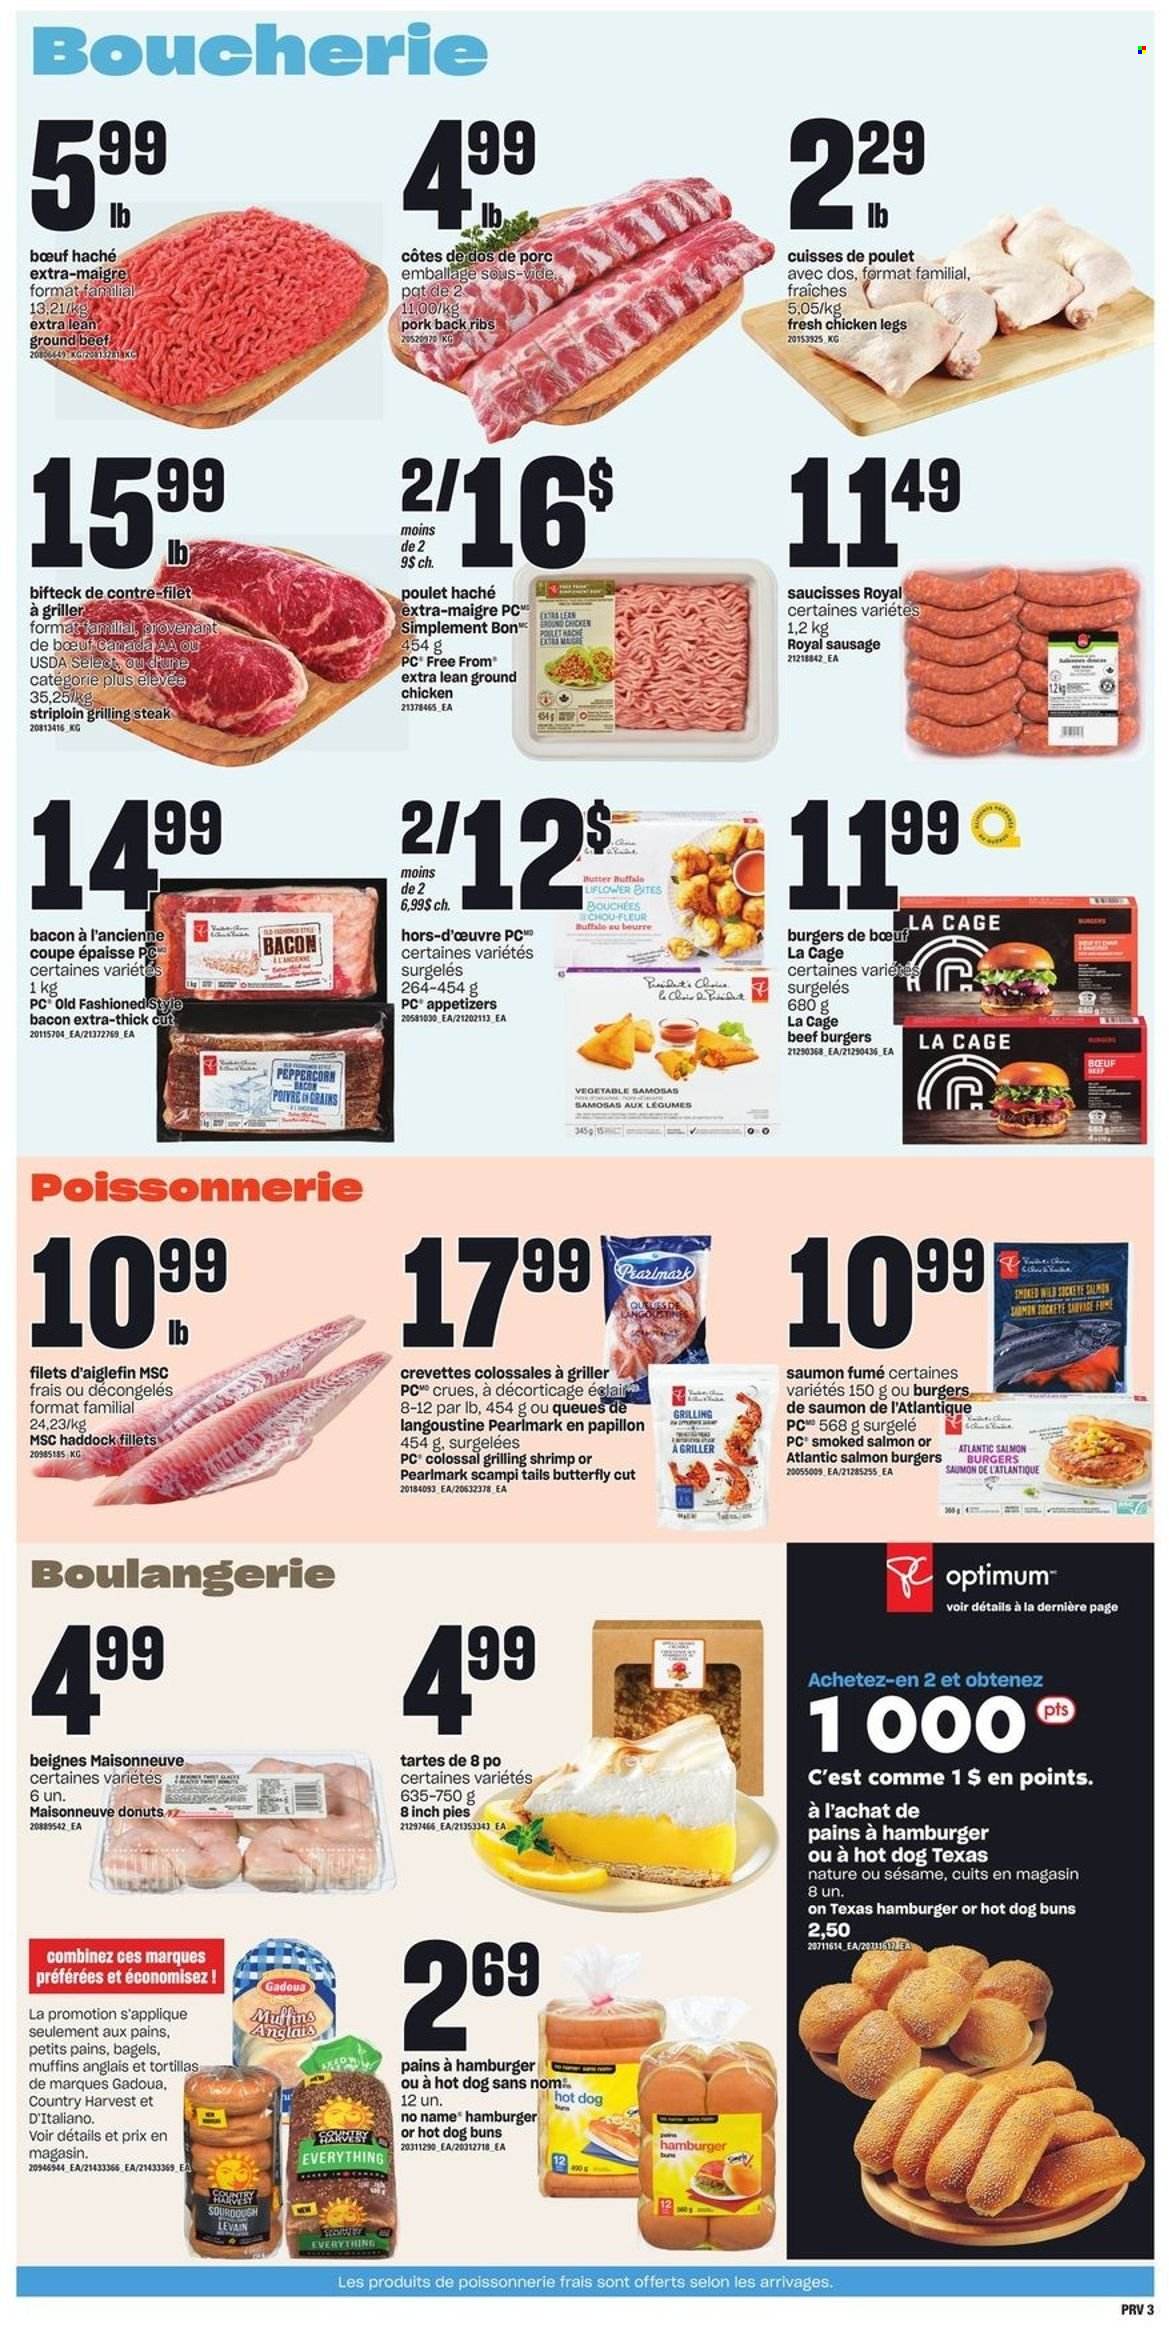 thumbnail - Provigo Flyer - May 19, 2022 - May 25, 2022 - Sales products - bagels, tortillas, buns, donut, muffin, salmon, smoked salmon, haddock, shrimps, No Name, beef burger, sausage, butter, Country Harvest, ground chicken, chicken legs, chicken, beef meat, ground beef, pork meat, pork ribs, pork back ribs, steak. Page 4.